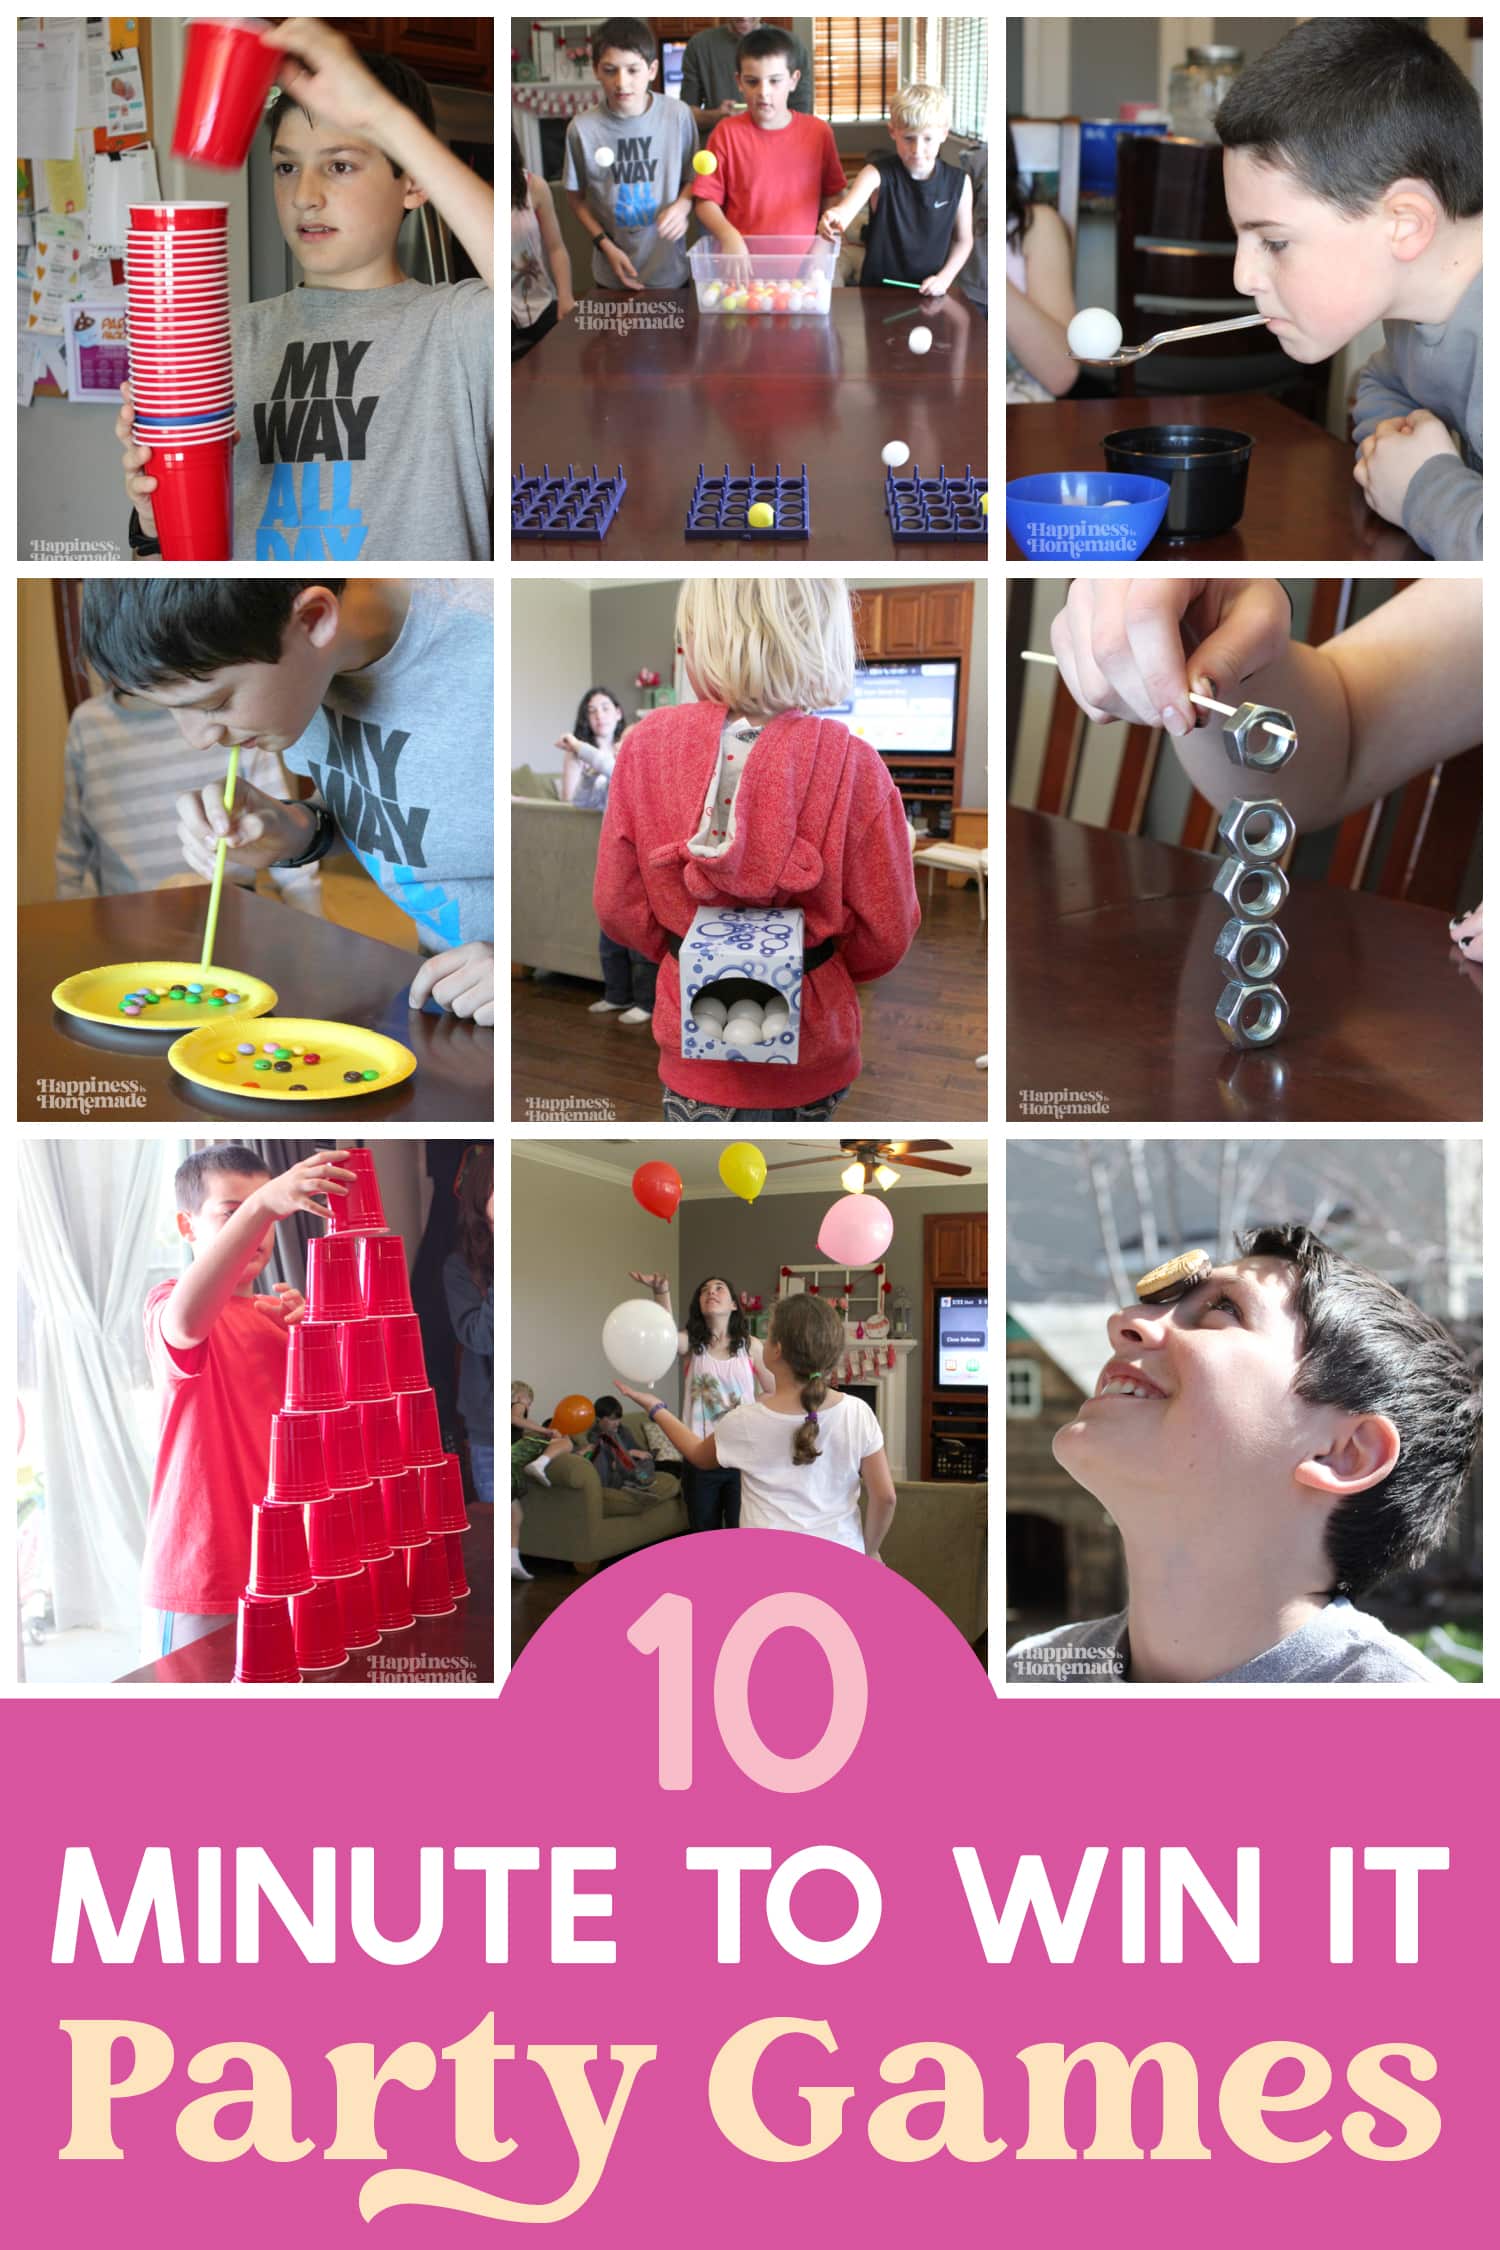 "10 Minute to Win It Party Games: Fun for All Ages!" text with collage image depicting several Minute to Win It Games for Kids and Adults